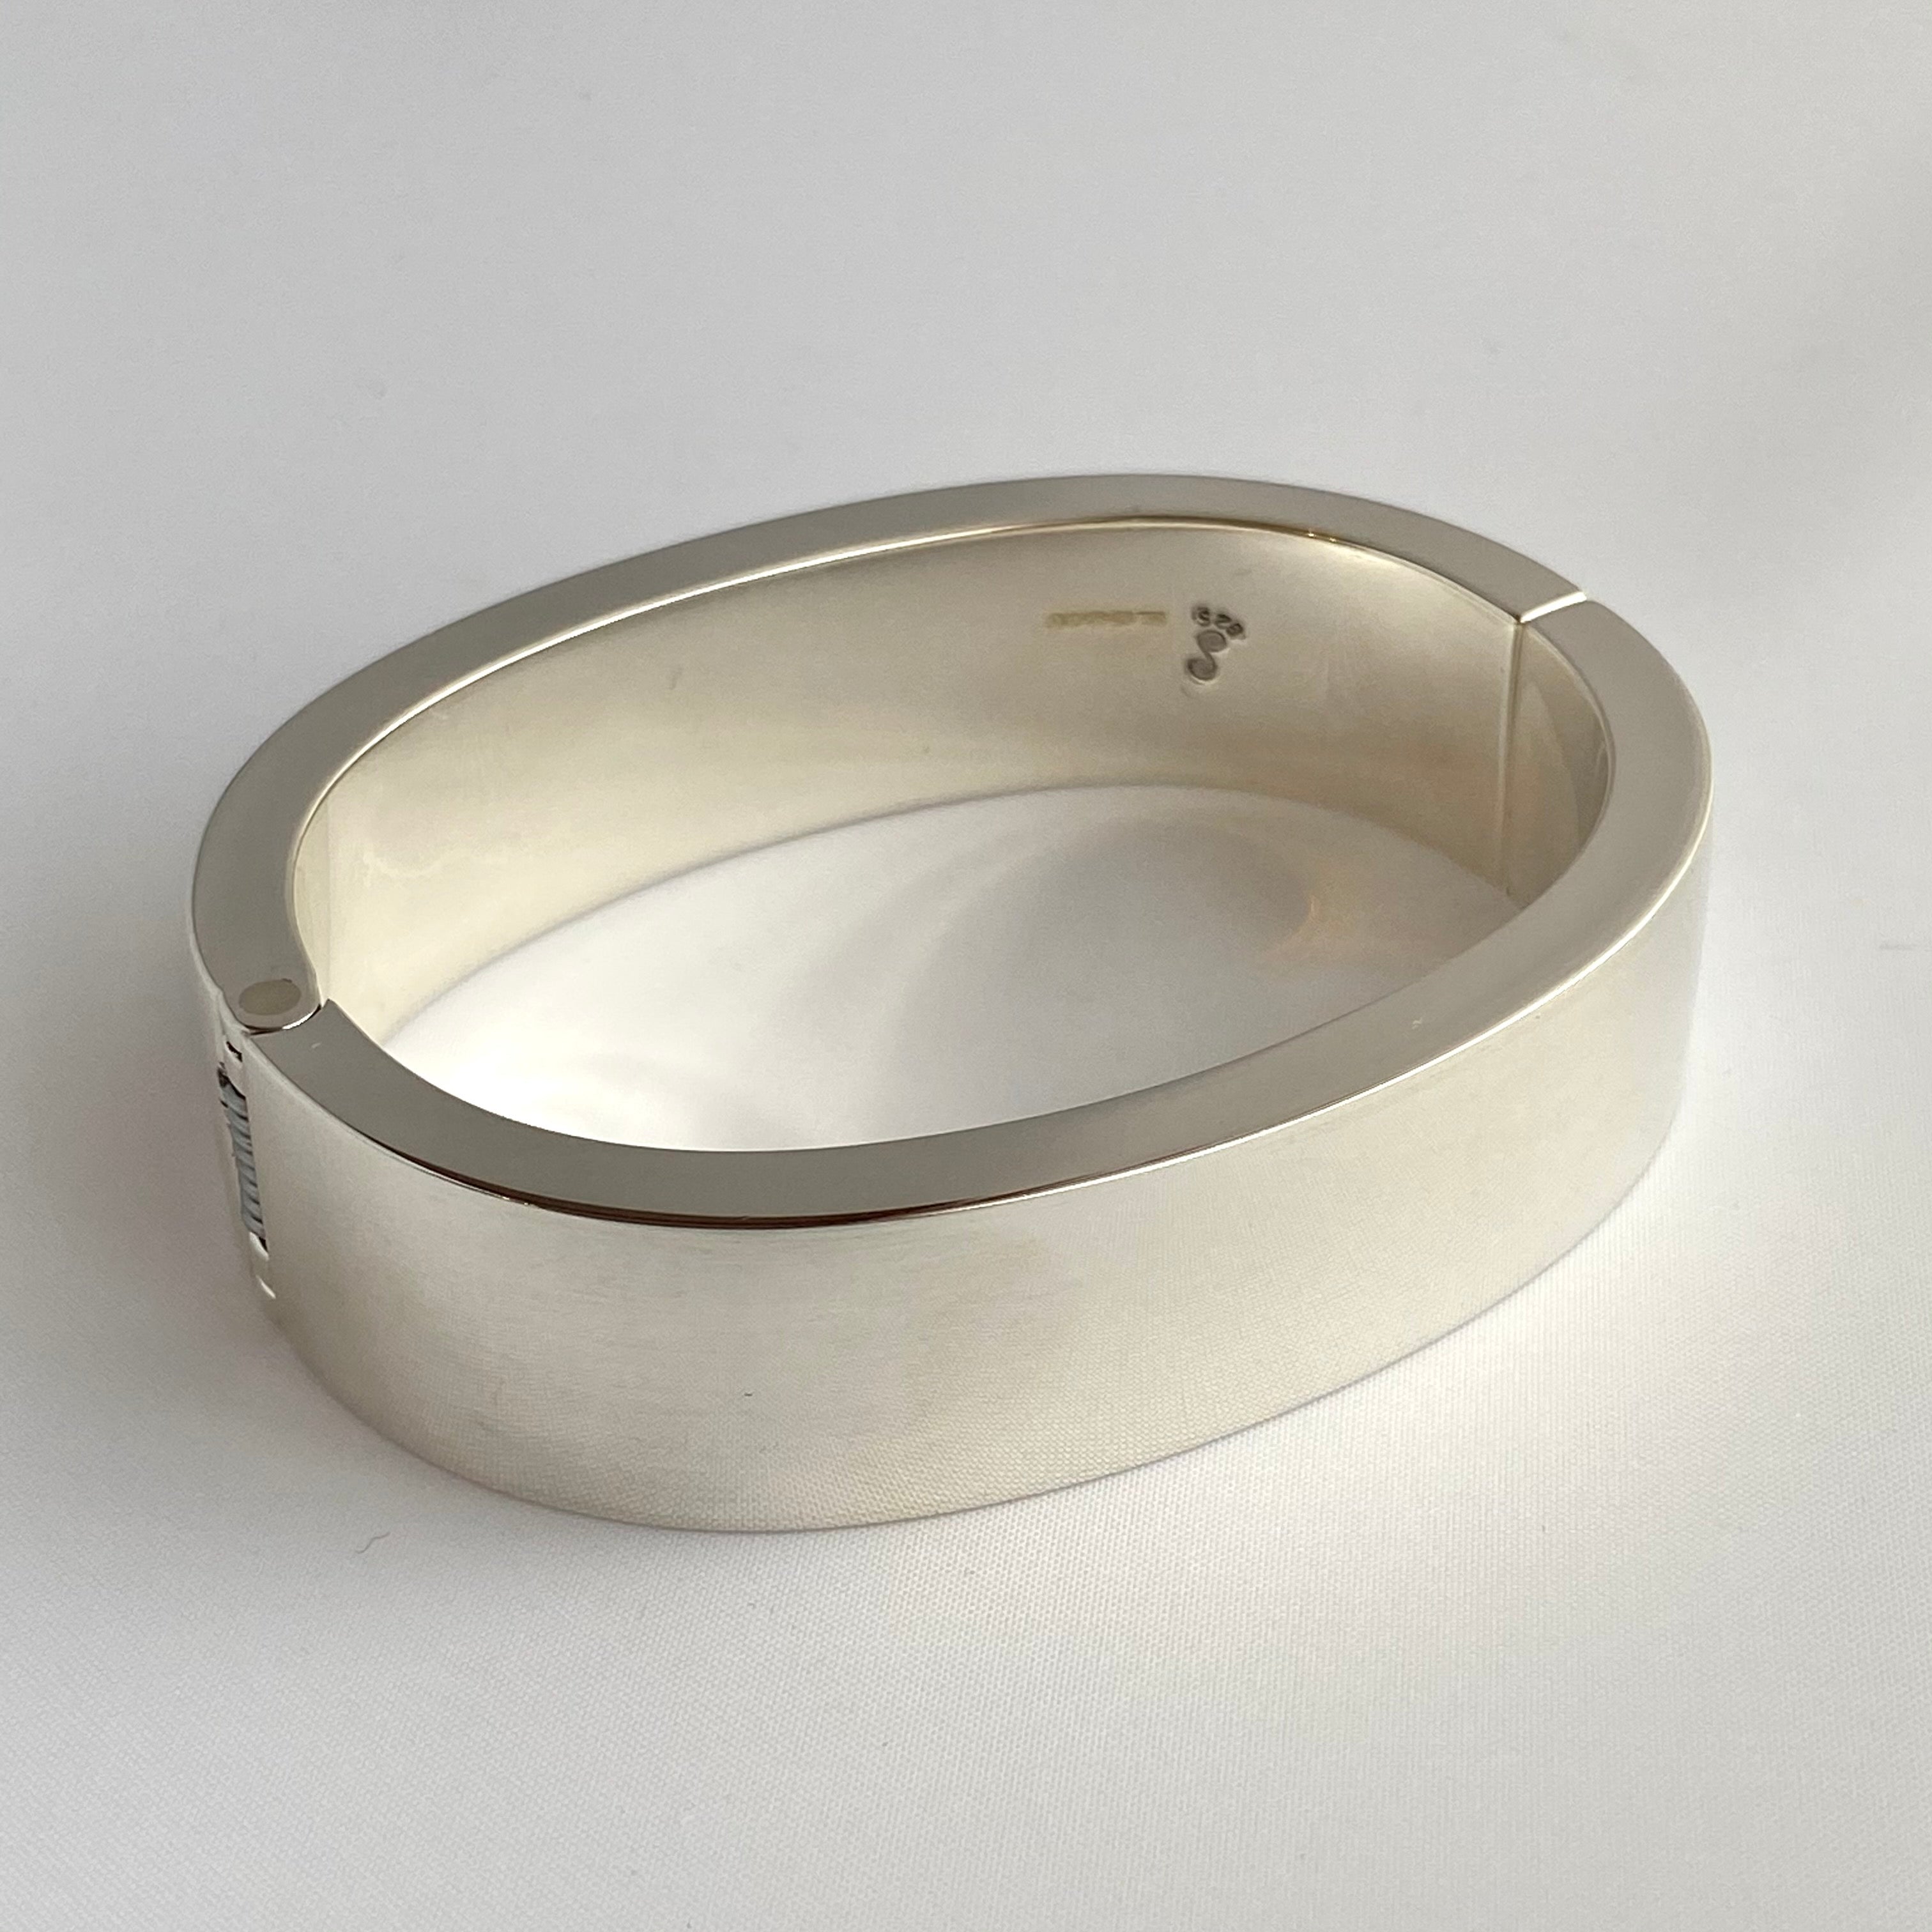 Heavy Chunky Contemporary Hinged Bracelet in Sterling Silver